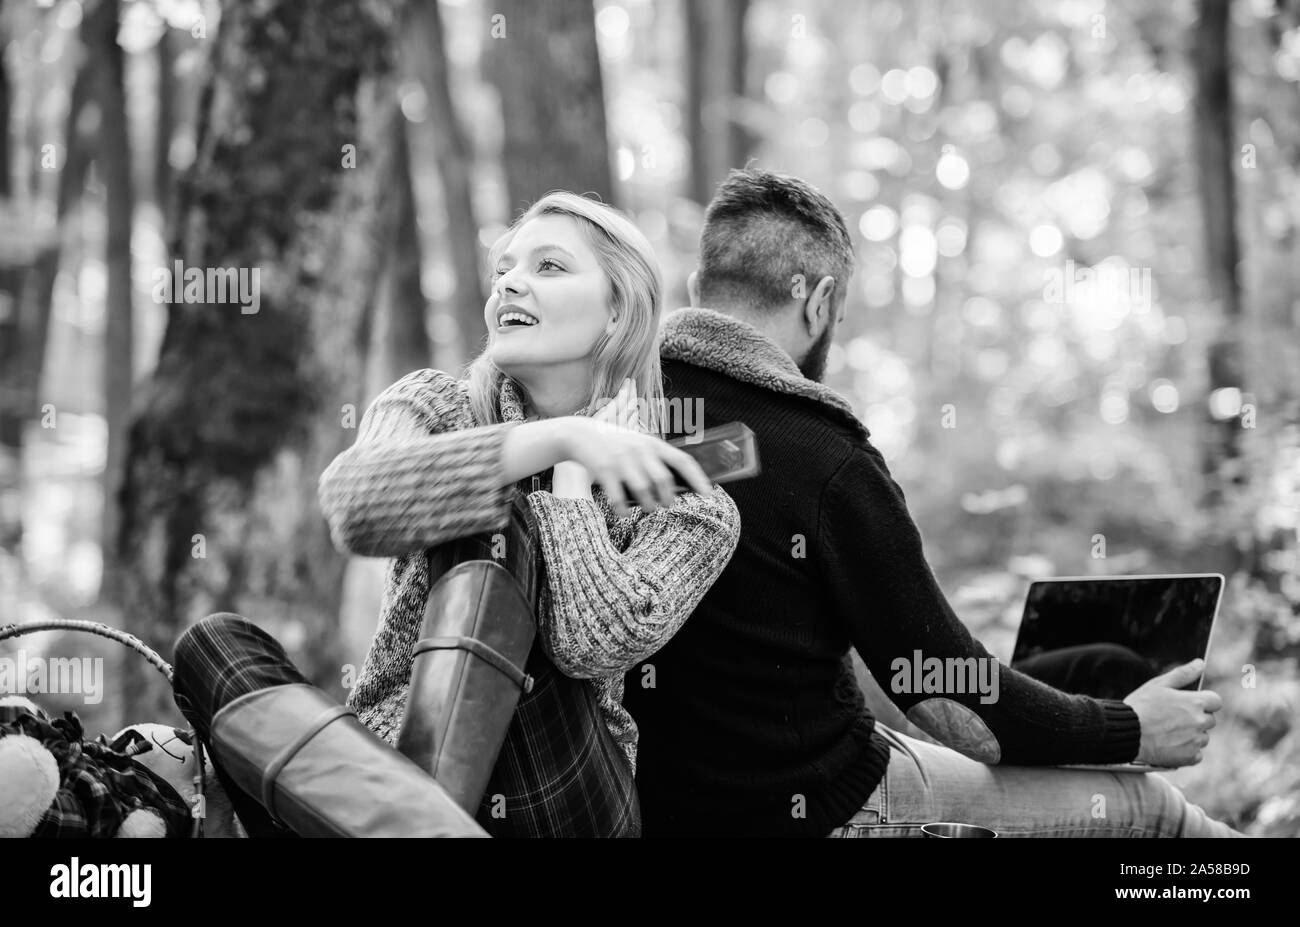 Online life modern technology. Logout of all accounts. Modern life. Happy loving couple relaxing in park with mobile gadgets. Internet addiction. Modern people always involved online communication. Stock Photo